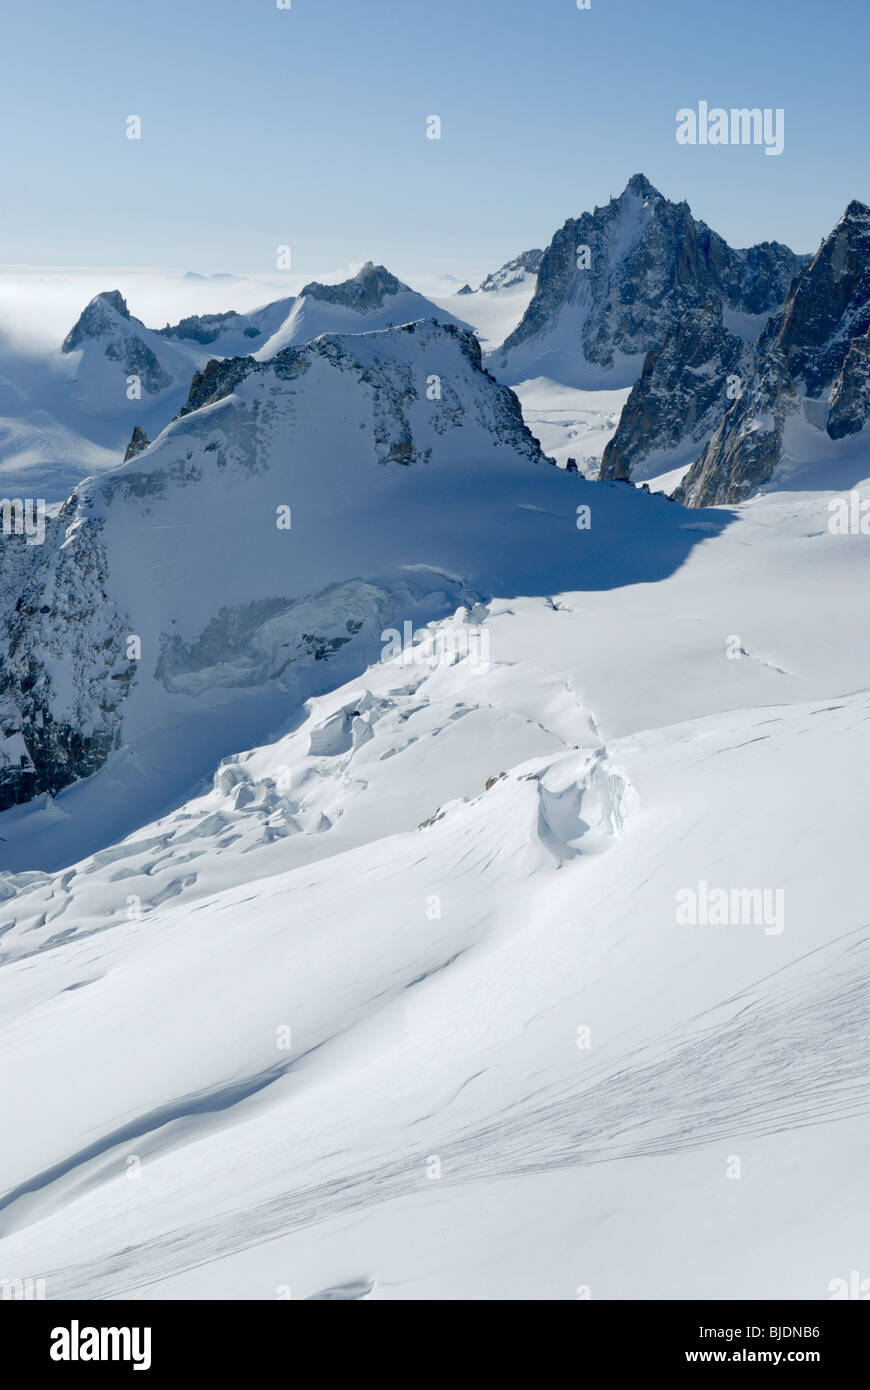 Le Vallee Blanche glacial skiing route seen from above. Tour Ronde in distance. Chamonix, France Stock Photo